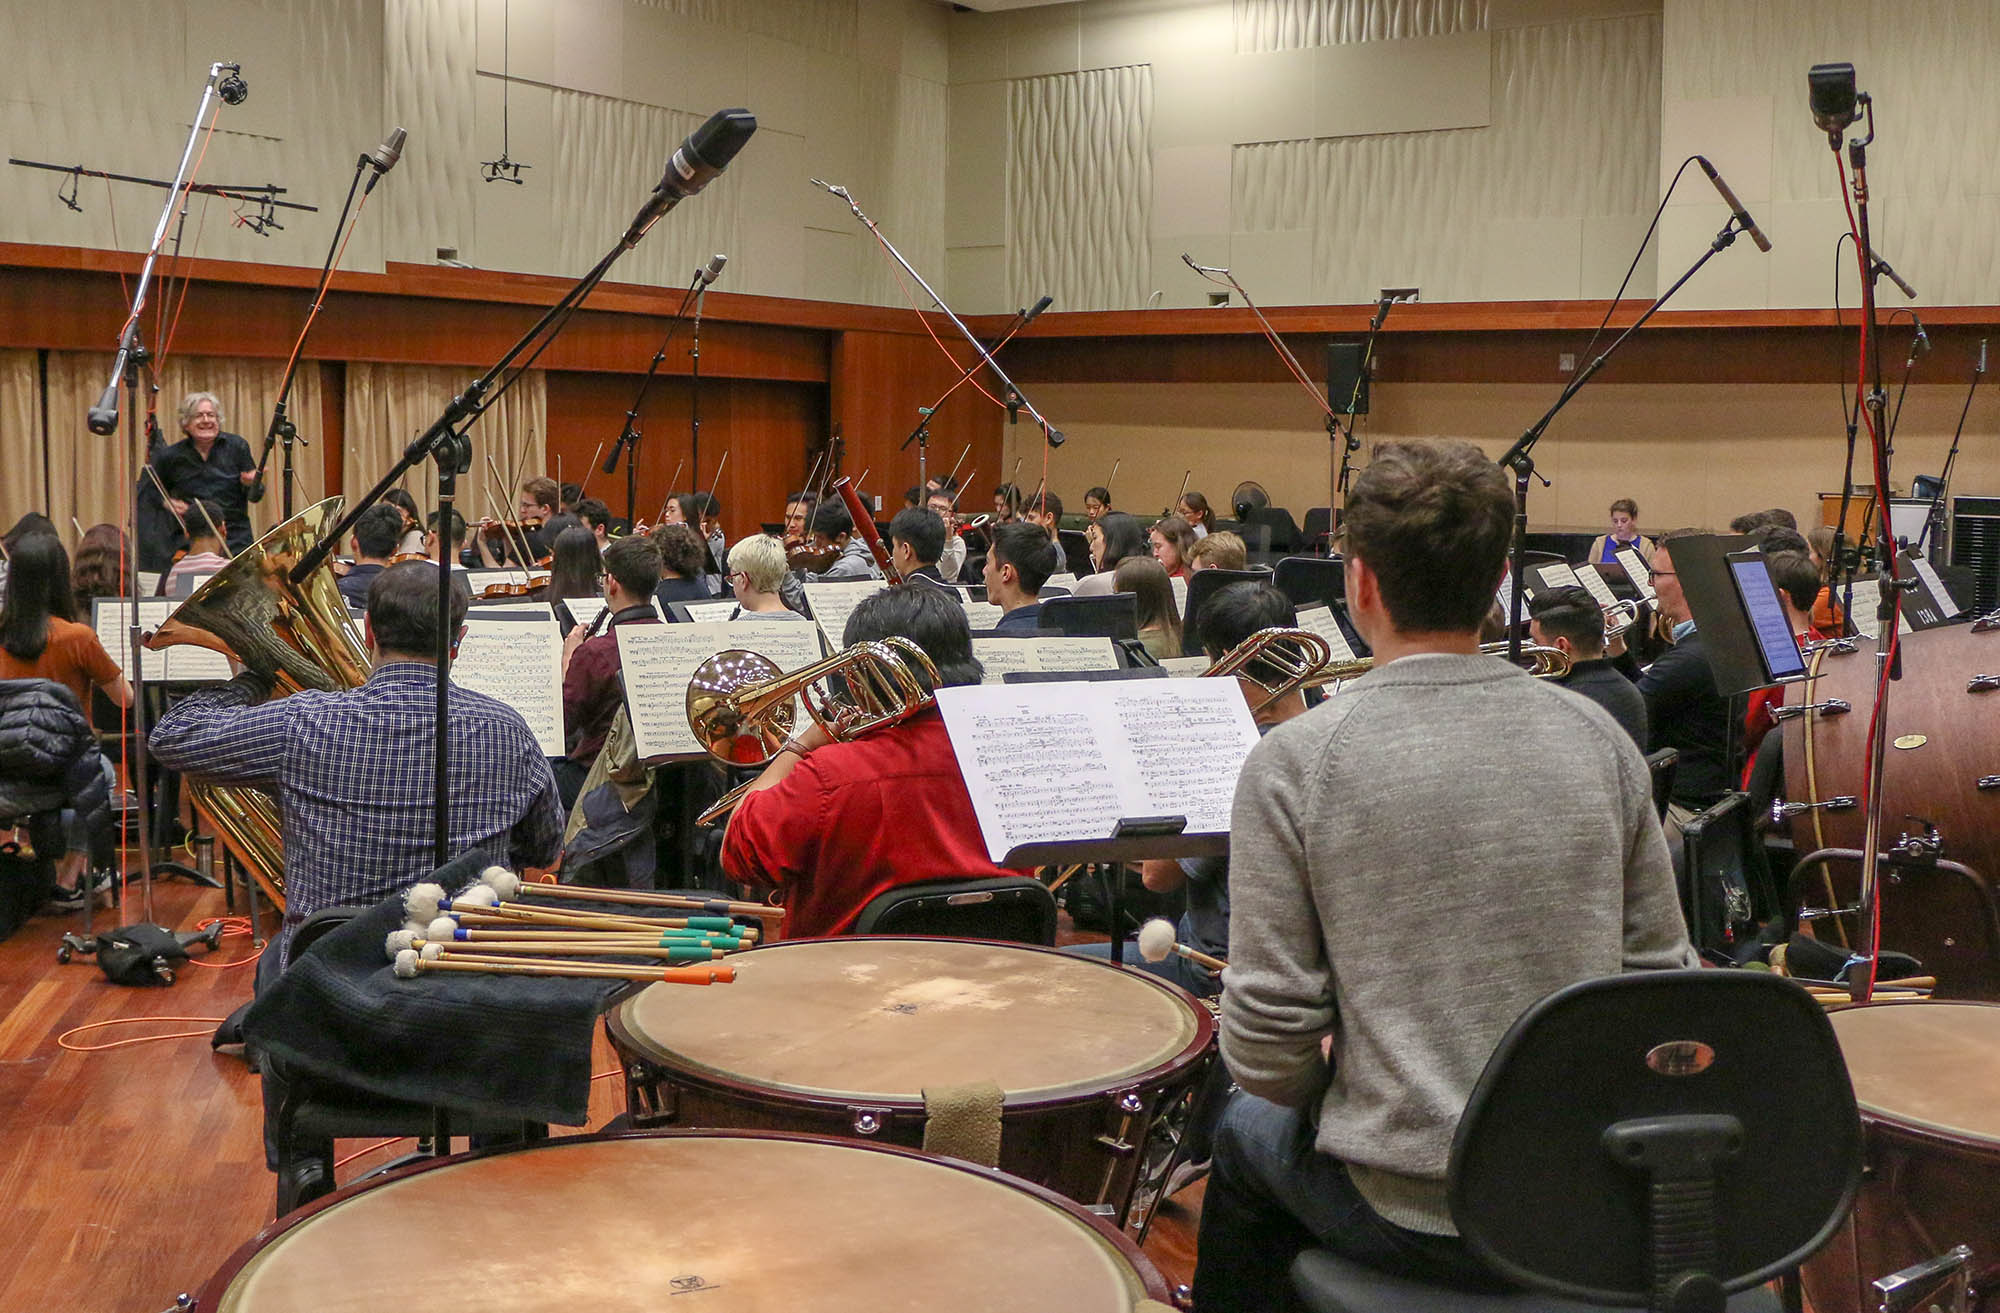 The USC Thornton Symphony rehearses while being recorded by 30 microphones. (Photo by Isaac Lee)